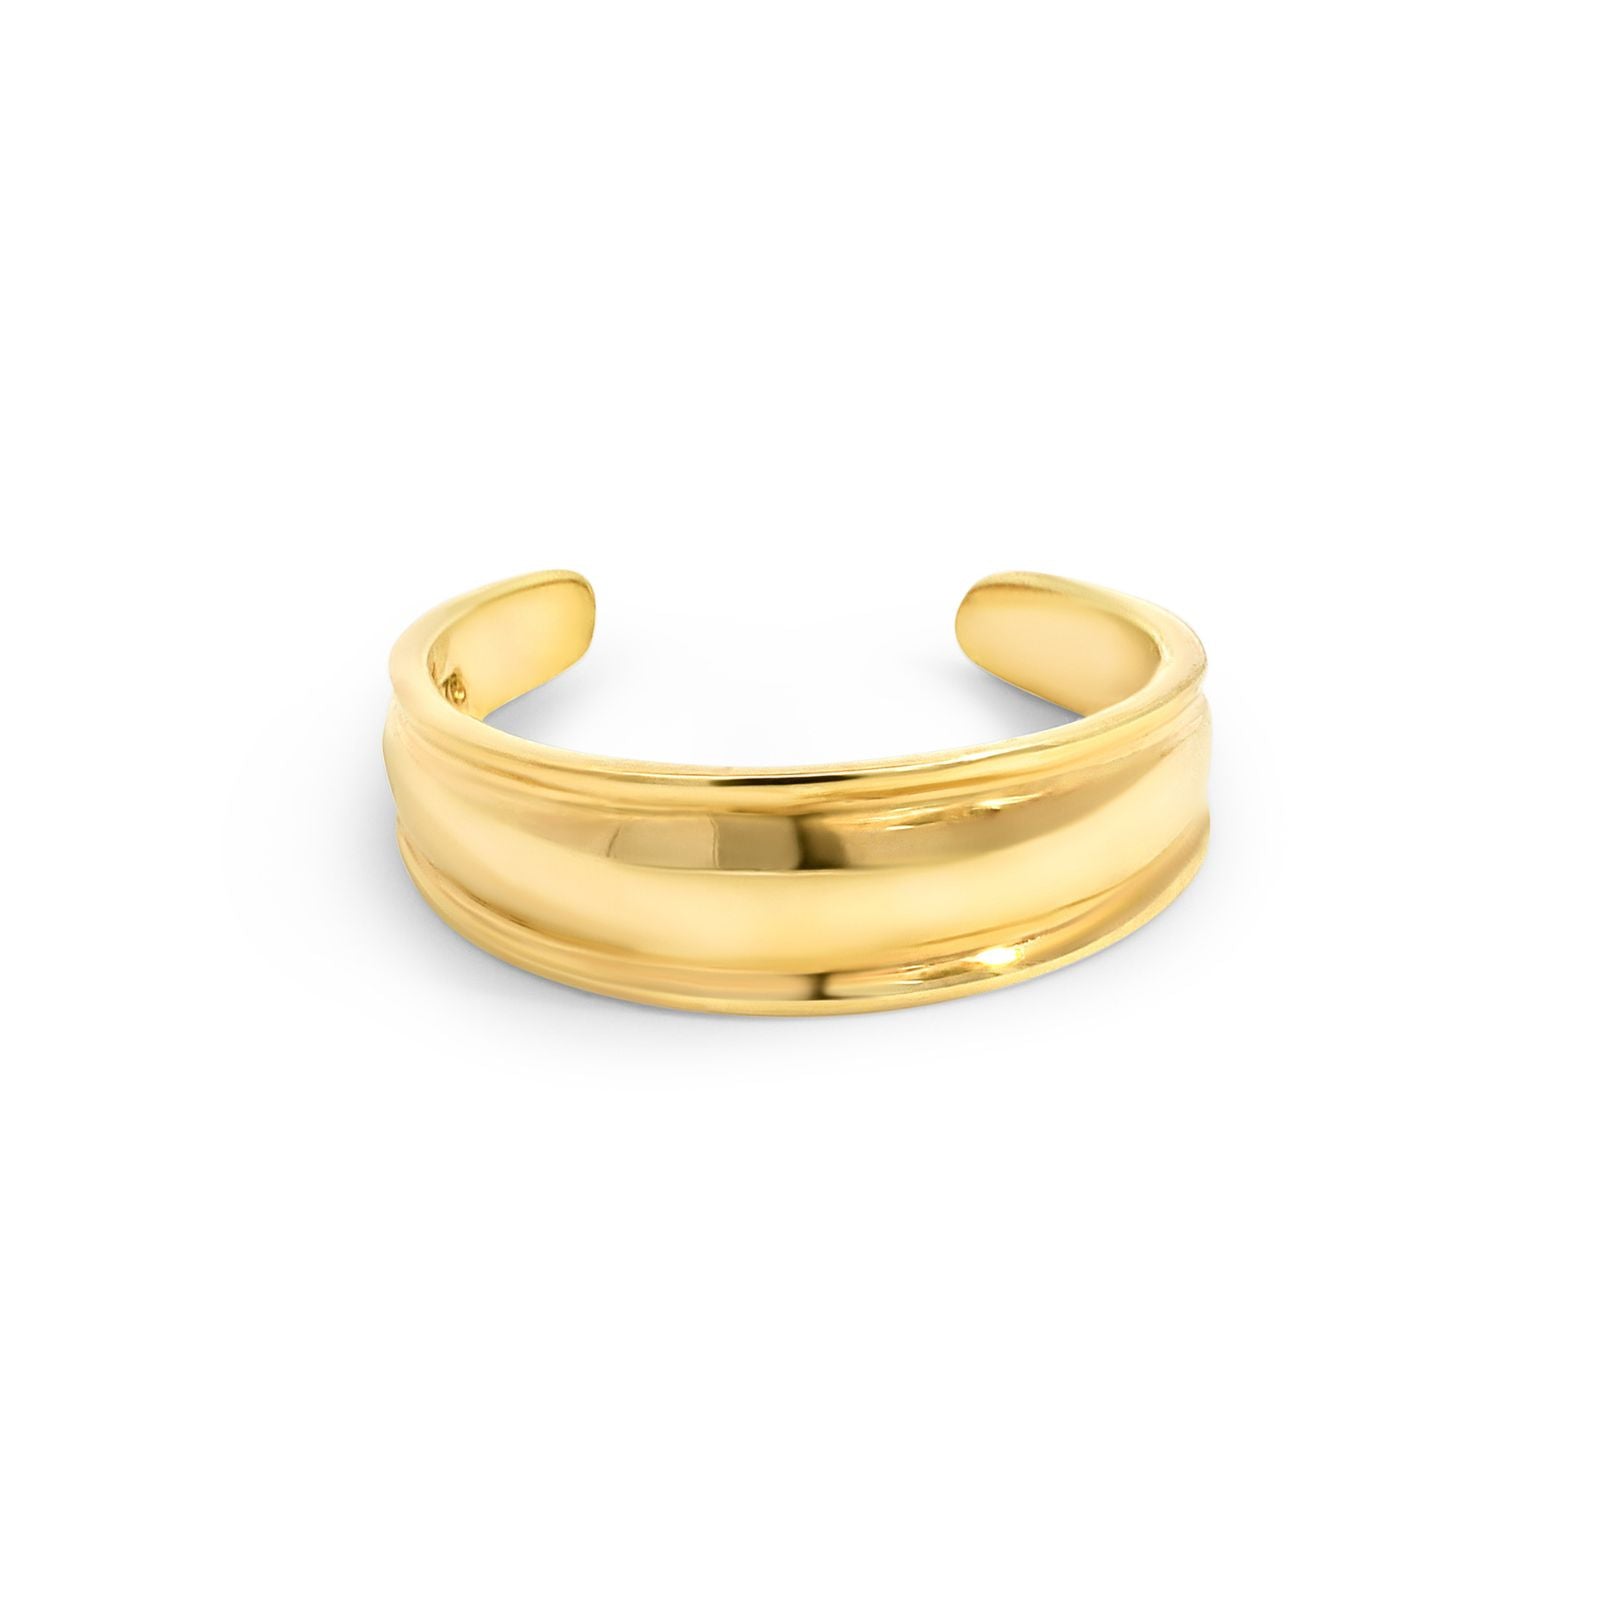 9ct Yellow Gold Plain Polished Toe Ring With Raised Edging